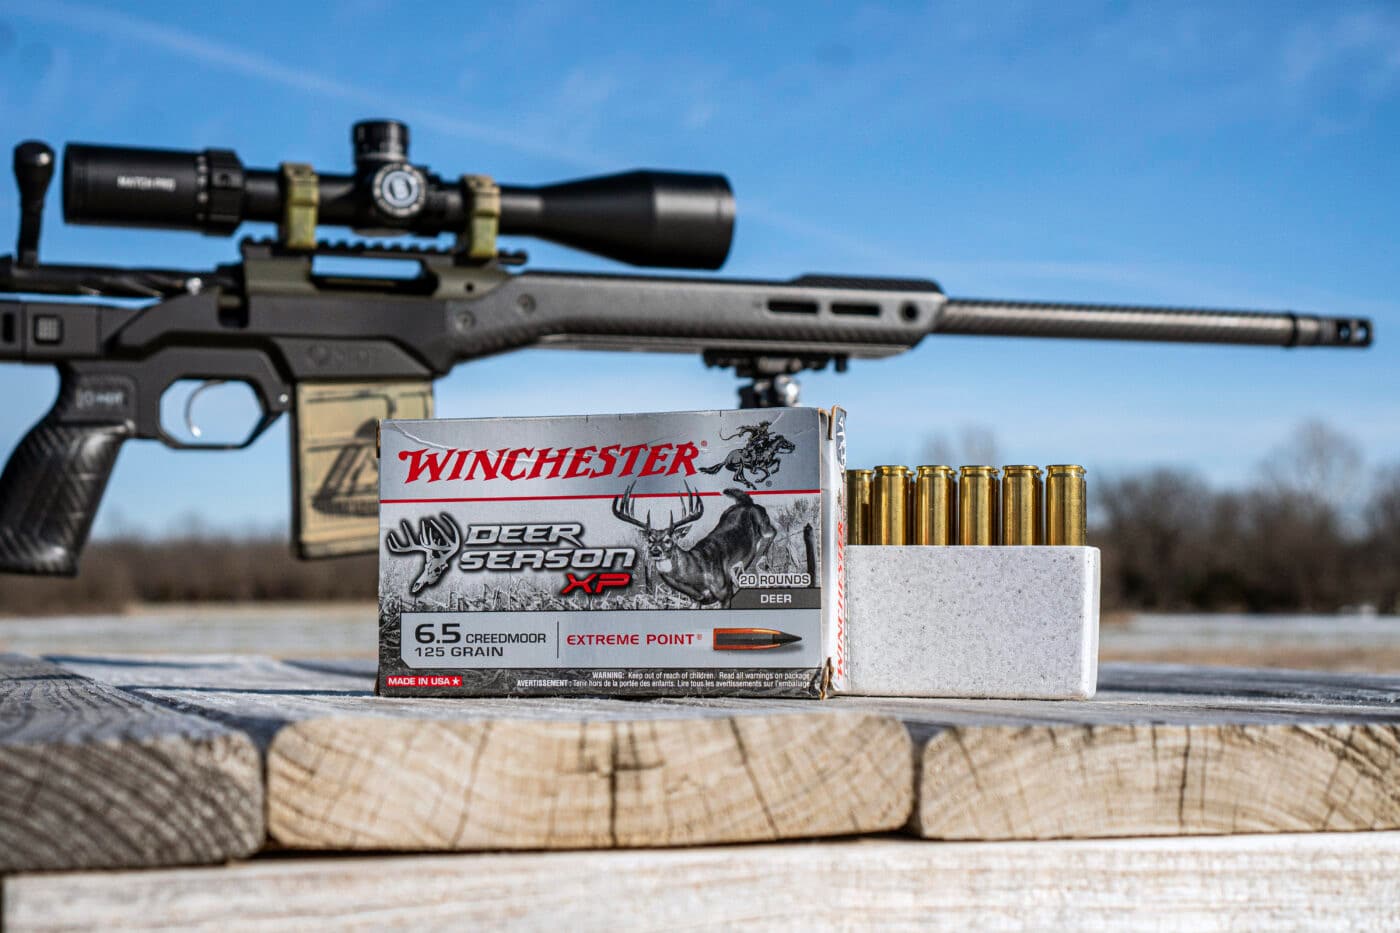 Winchester Deer Season XP ammo with Springfield Waypoint rifle in the background